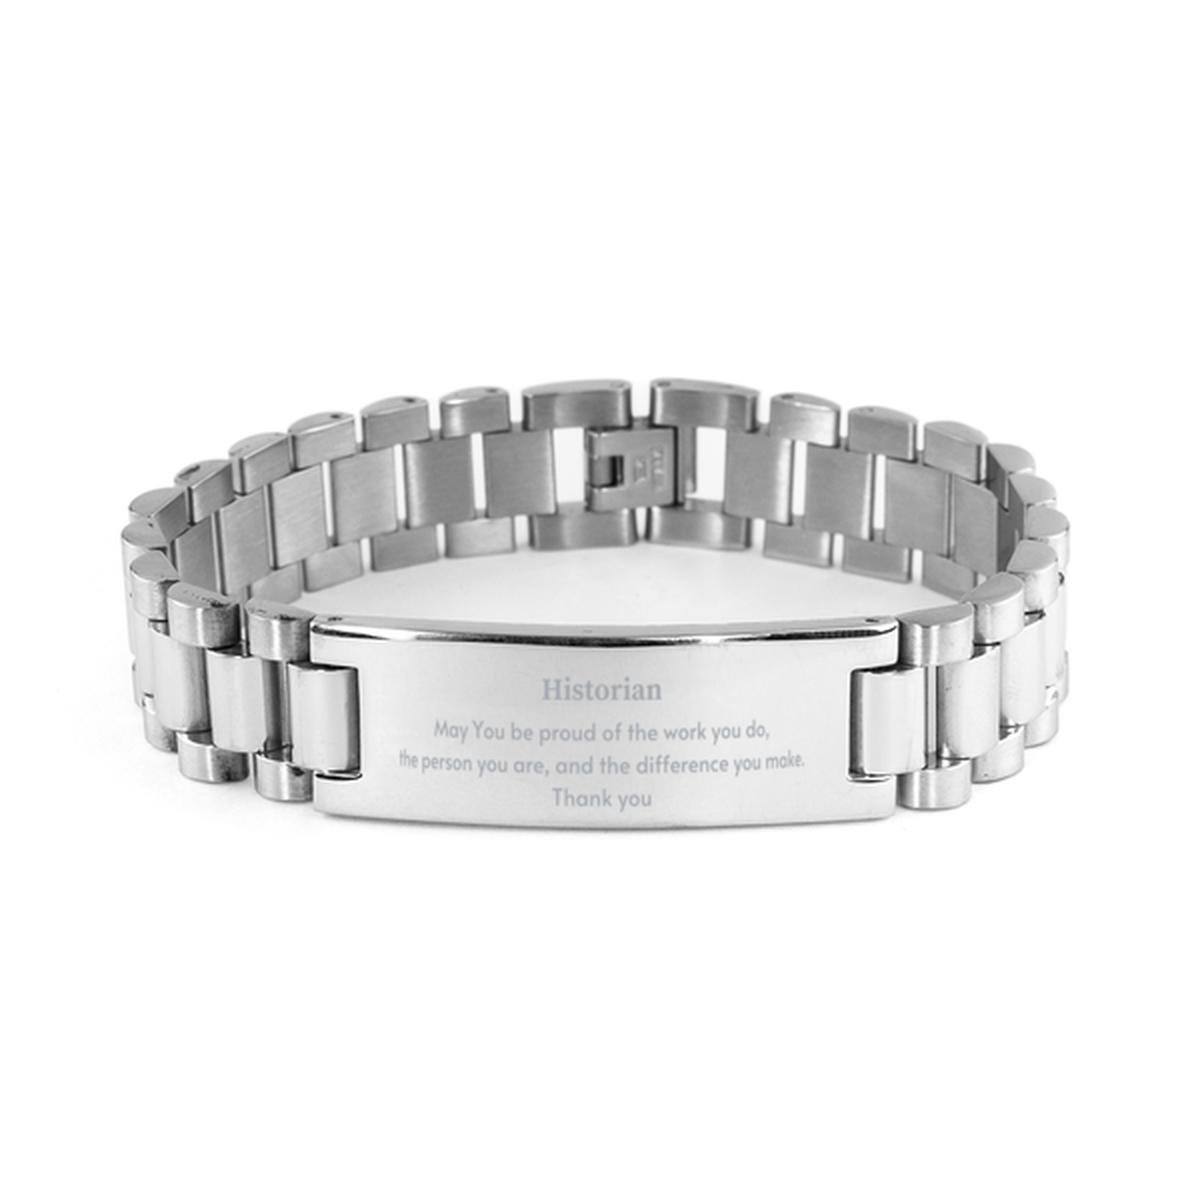 Heartwarming Ladder Stainless Steel Bracelet Retirement Coworkers Gifts for Historian, Historian May You be proud of the work you do, the person you are Gifts for Boss Men Women Friends